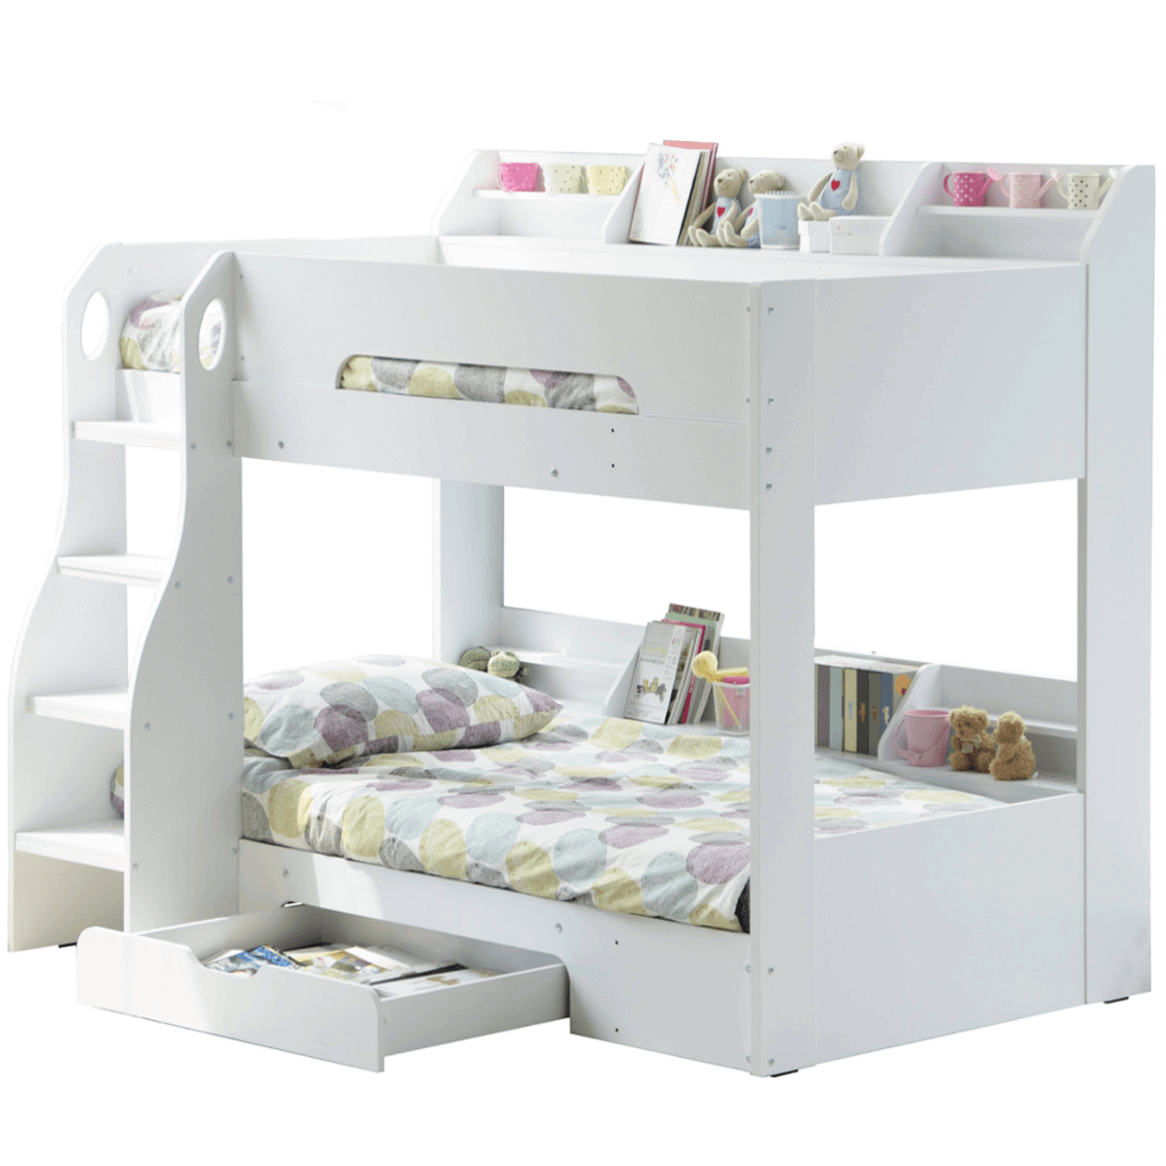 Flick White Bunk Bed With Storage  Modern Bunk Beds  FADS